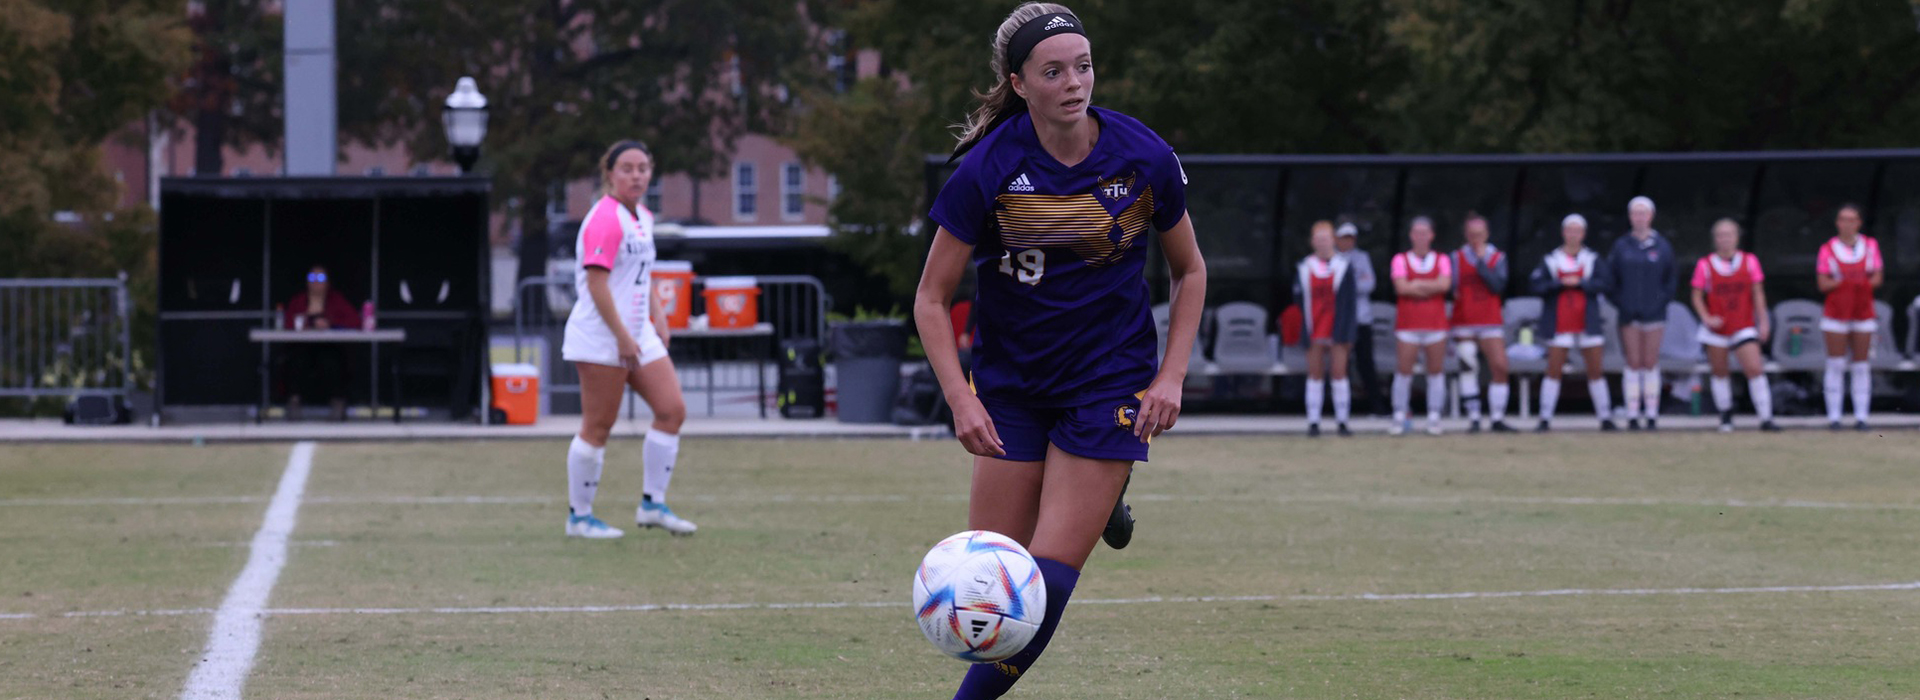 Top-seeded Tennessee Tech plays host to Lindenwood in Friday’s OVC Tournament semifinal